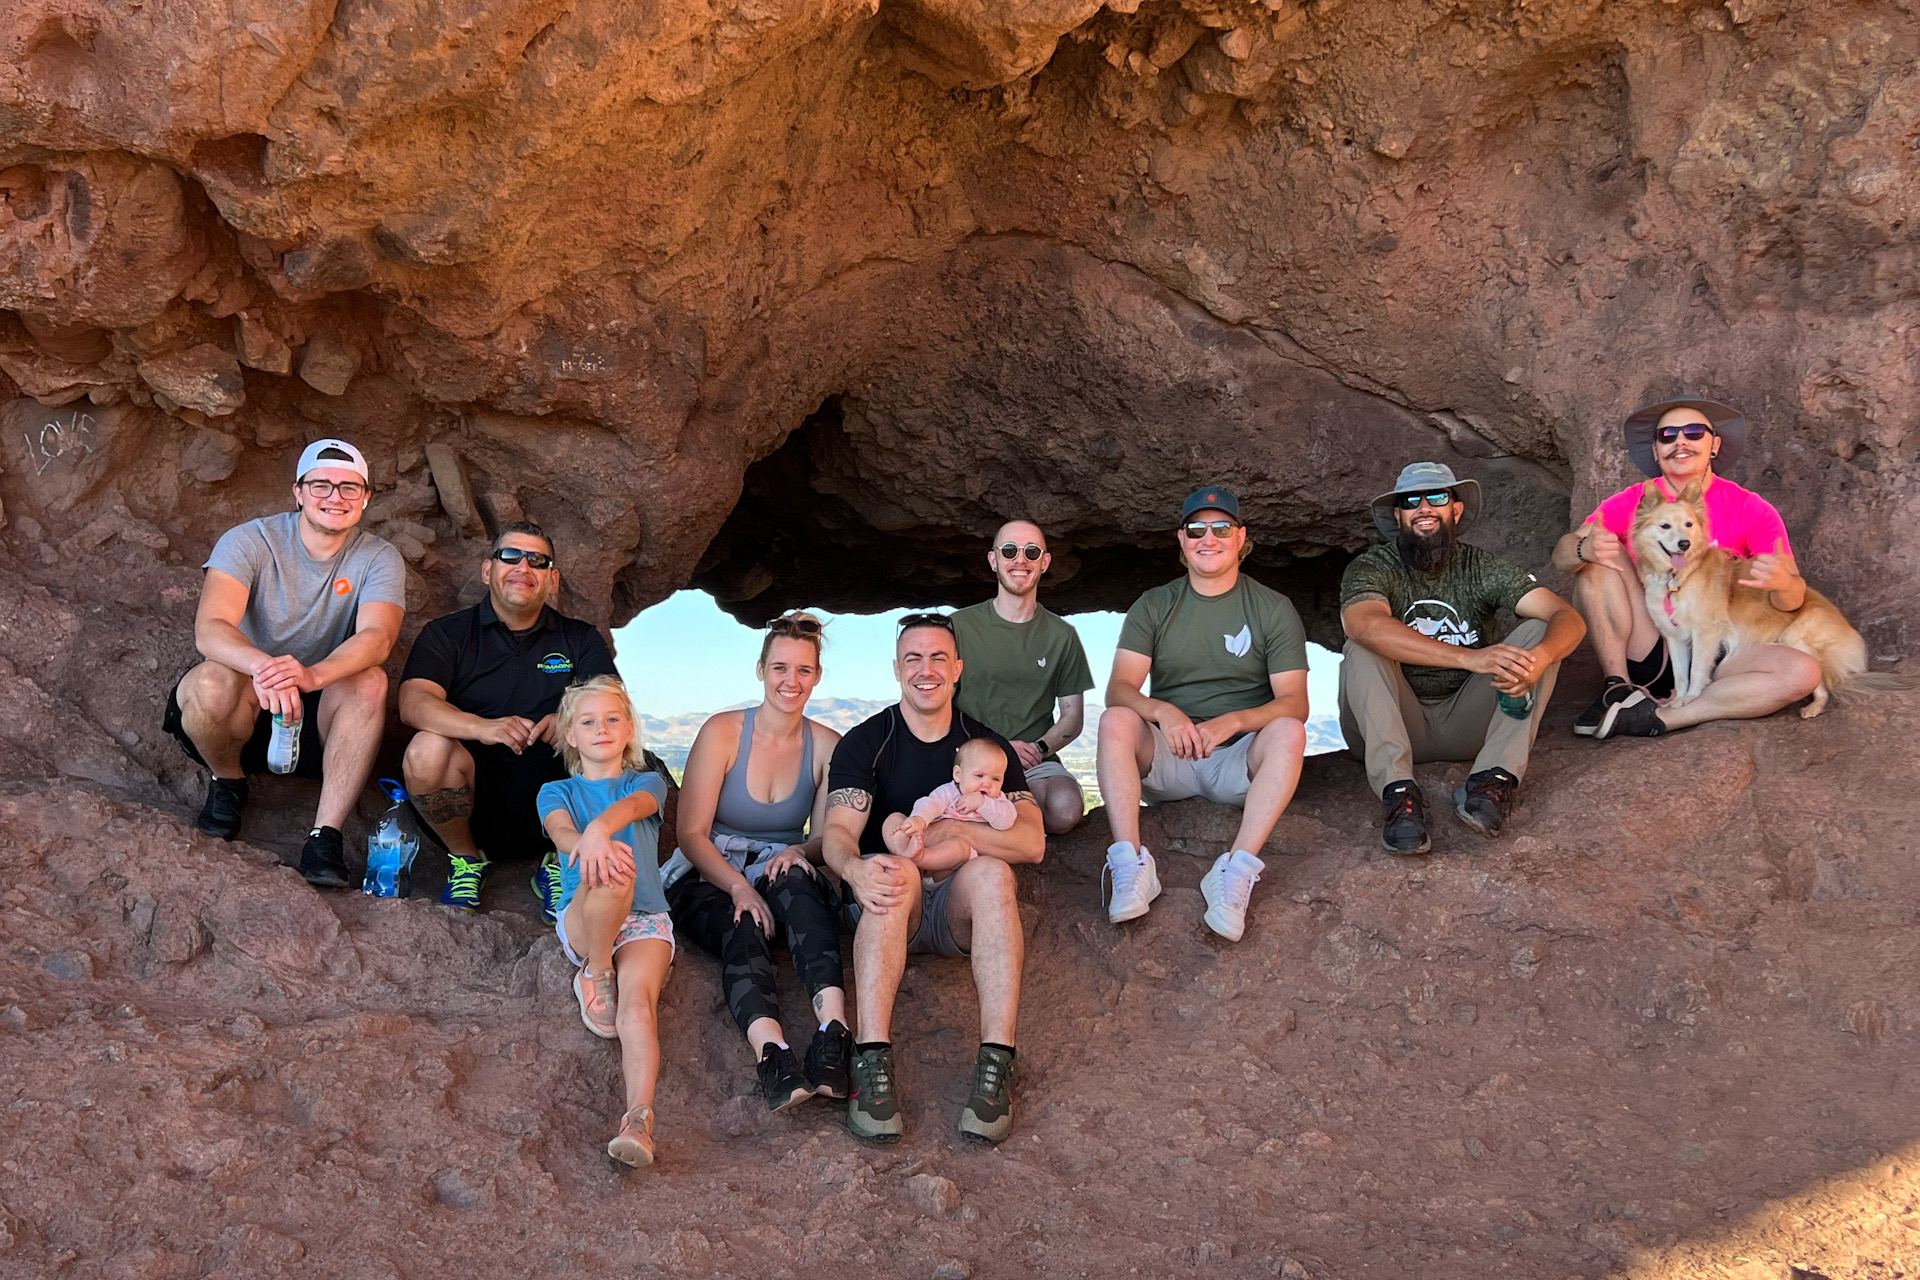 Reimagine Roofing team on a hiking trip showcases our commitment to personal development, health, and team cohesion. We emphasize active, engaging experiences that foster a supportive workplace, reflecting our dedication to growth both on and off the job.